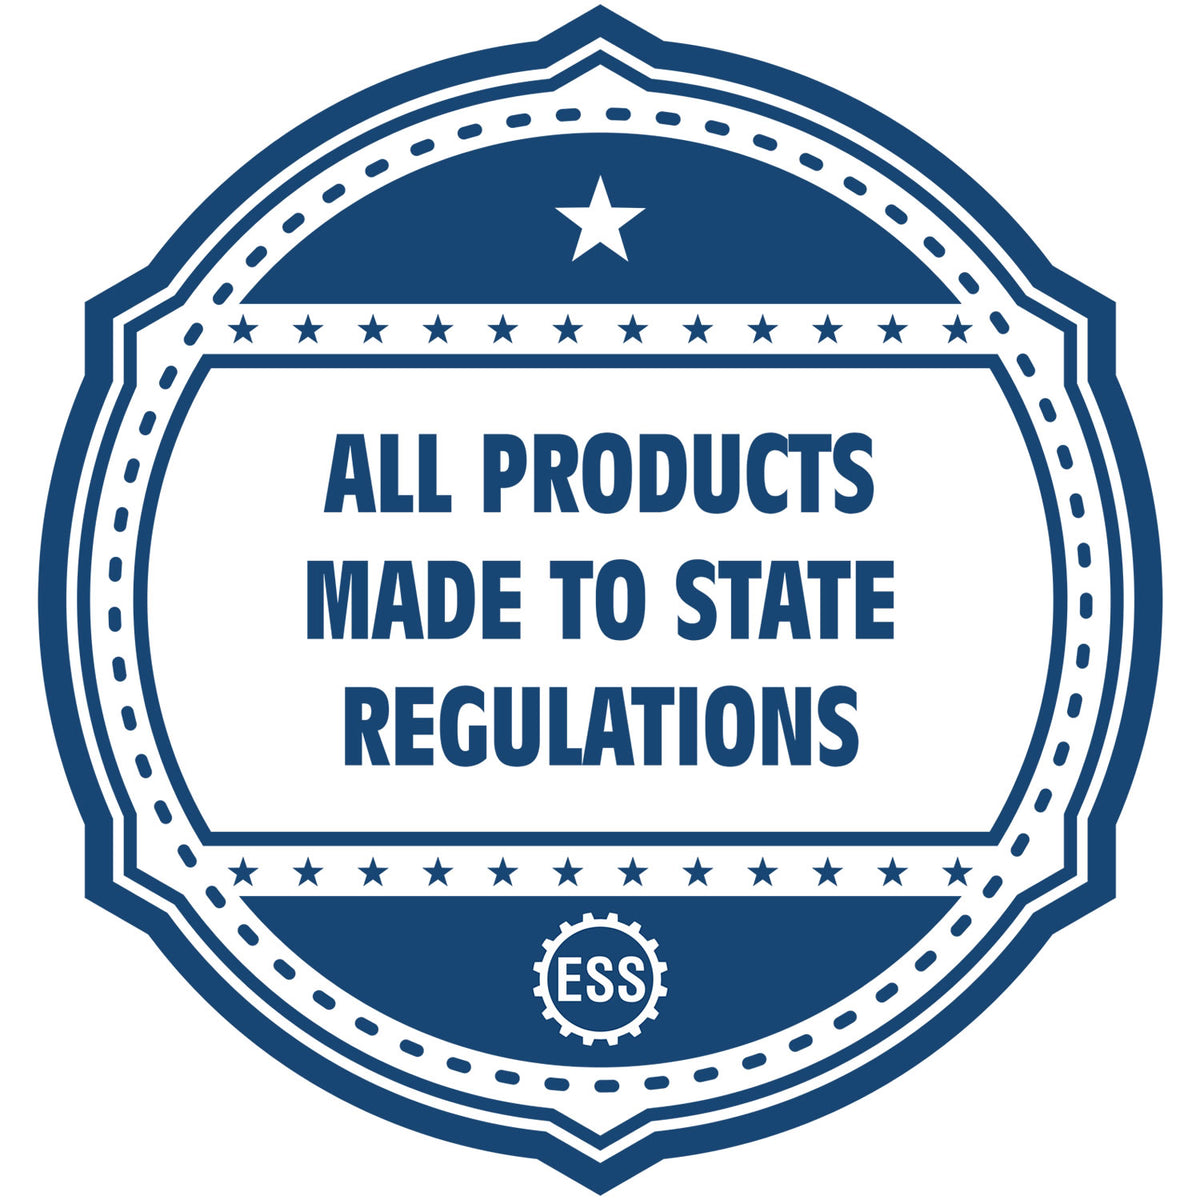 An icon or badge element for the Digital Texas Landscape Architect Stamp showing that this product is made in compliance with state regulations.